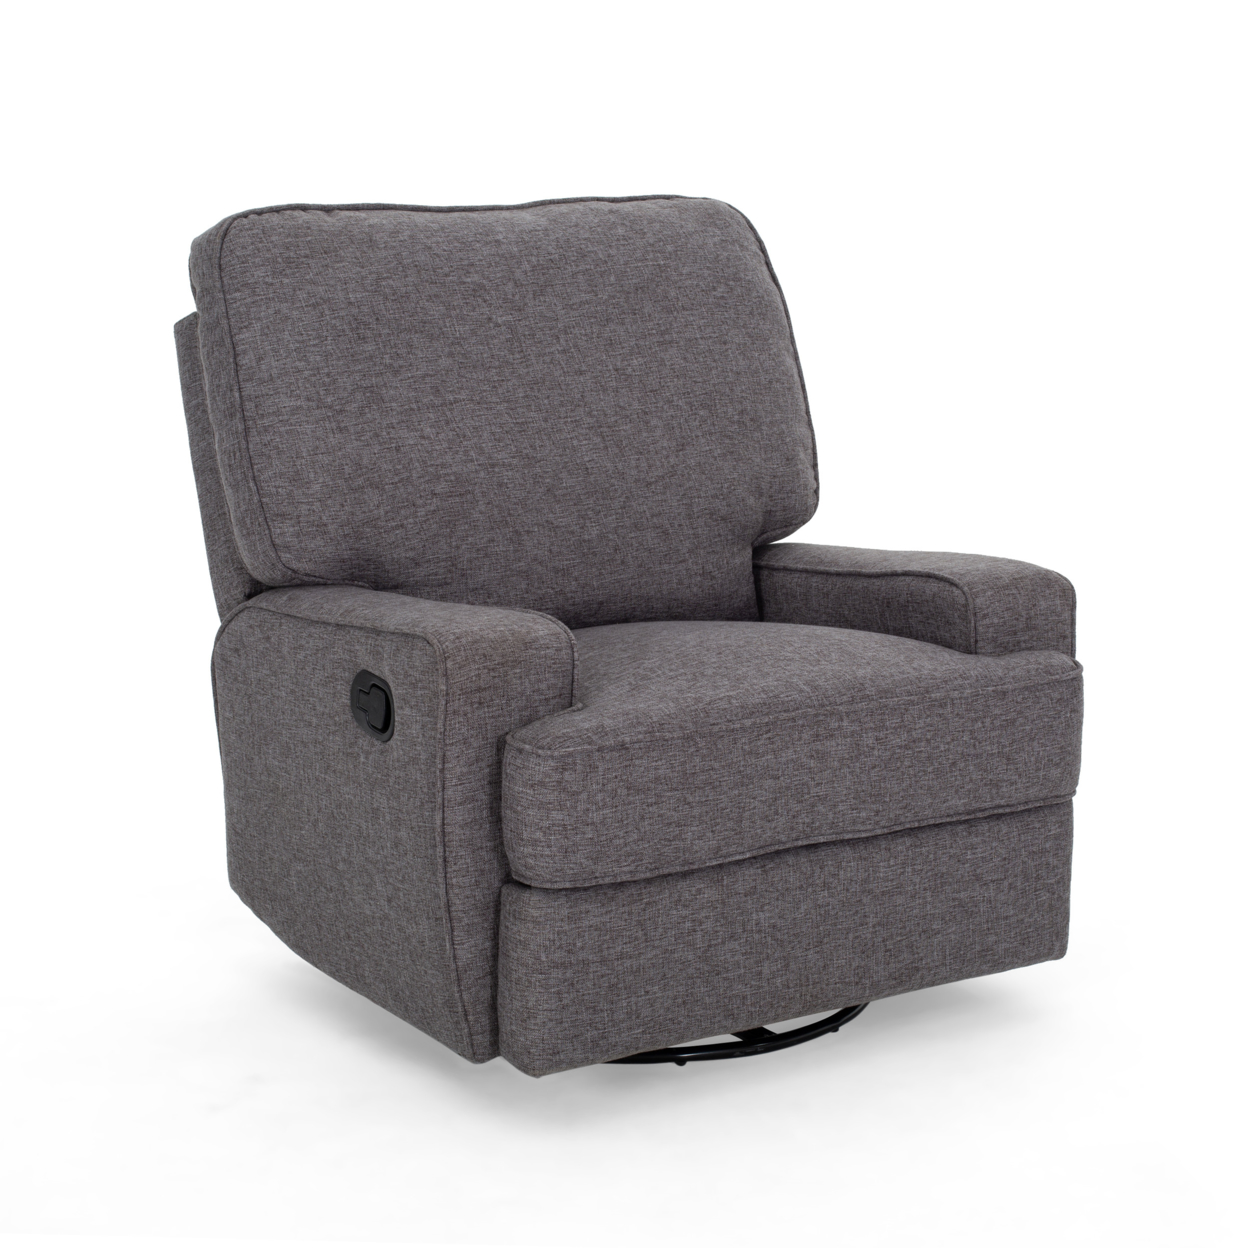 Sibyl Glider Recliner With Swivel, Traditional - Navy Blue